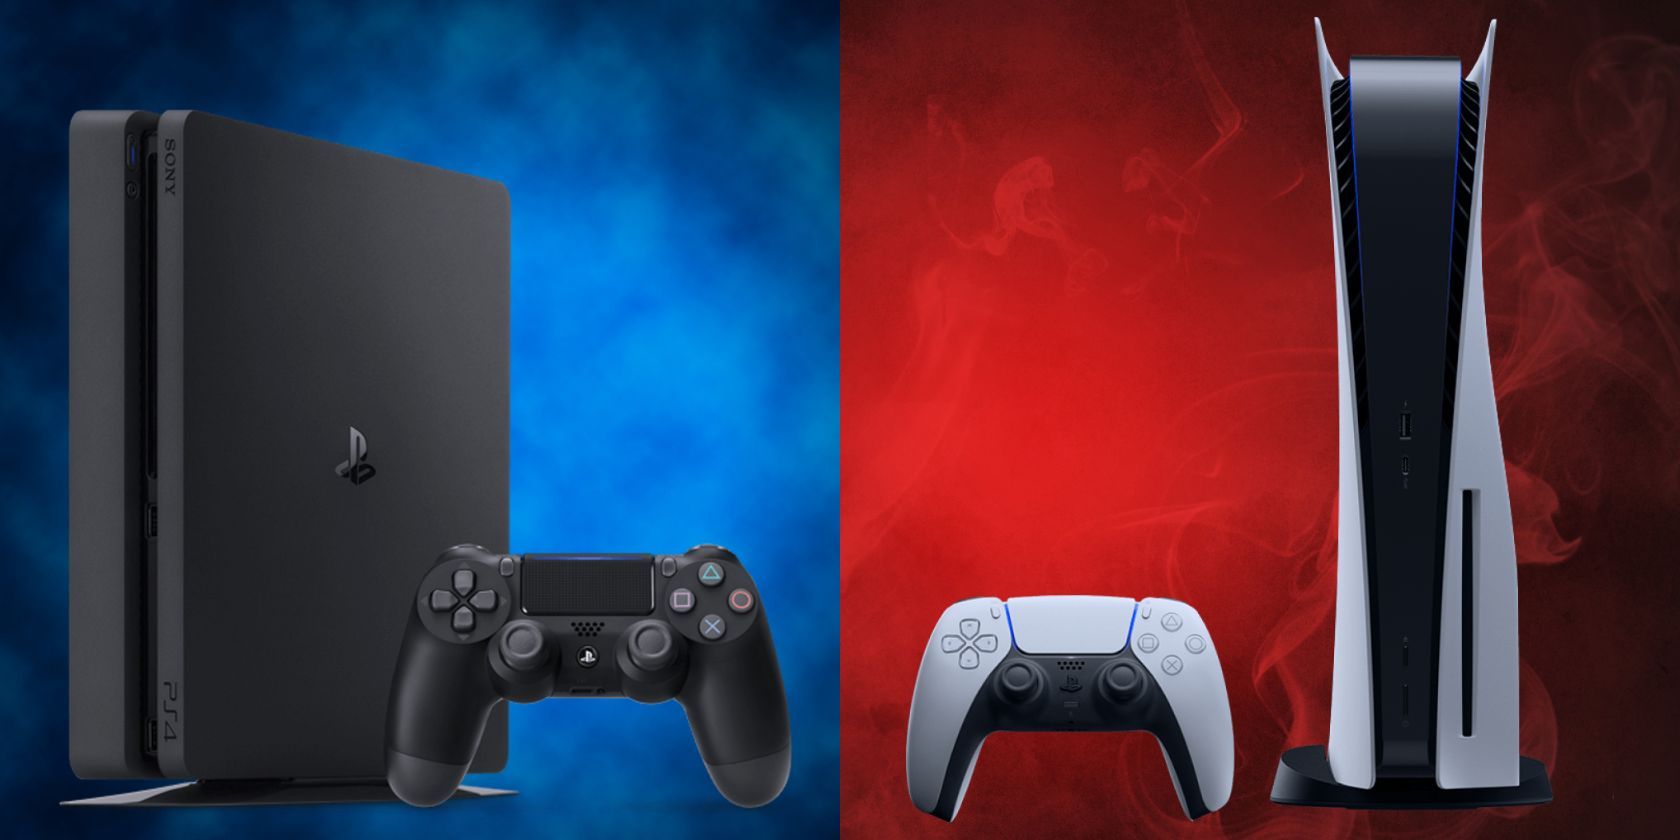 PlayStation Video shutting down soon on PS5 and PS4 — what you need to know